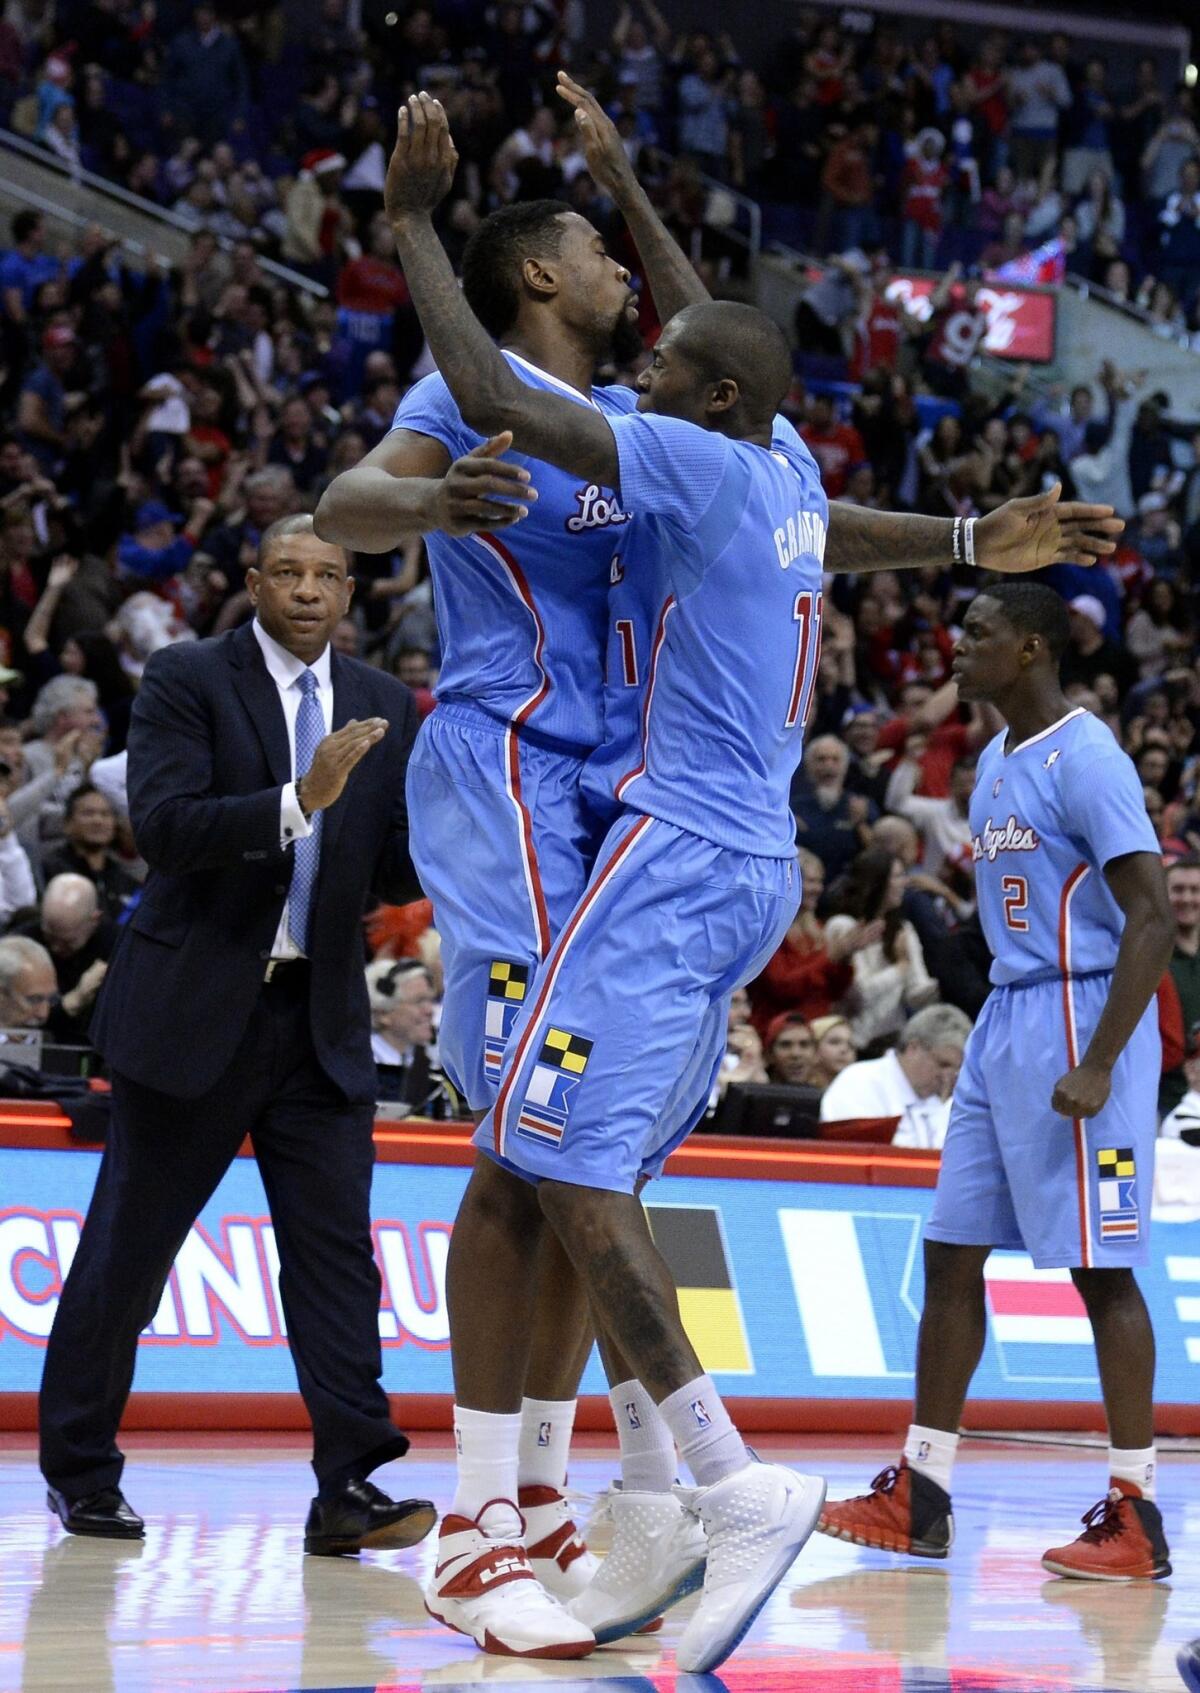 Clippers guard Jamal Crawford, right, is congratulated by teammate DeAndre Jordan after scoring the tying basket to send Sunday's game against the Minnesota Timberwolves into overtime. The Clippers went on to win in the extra period, 120-116.